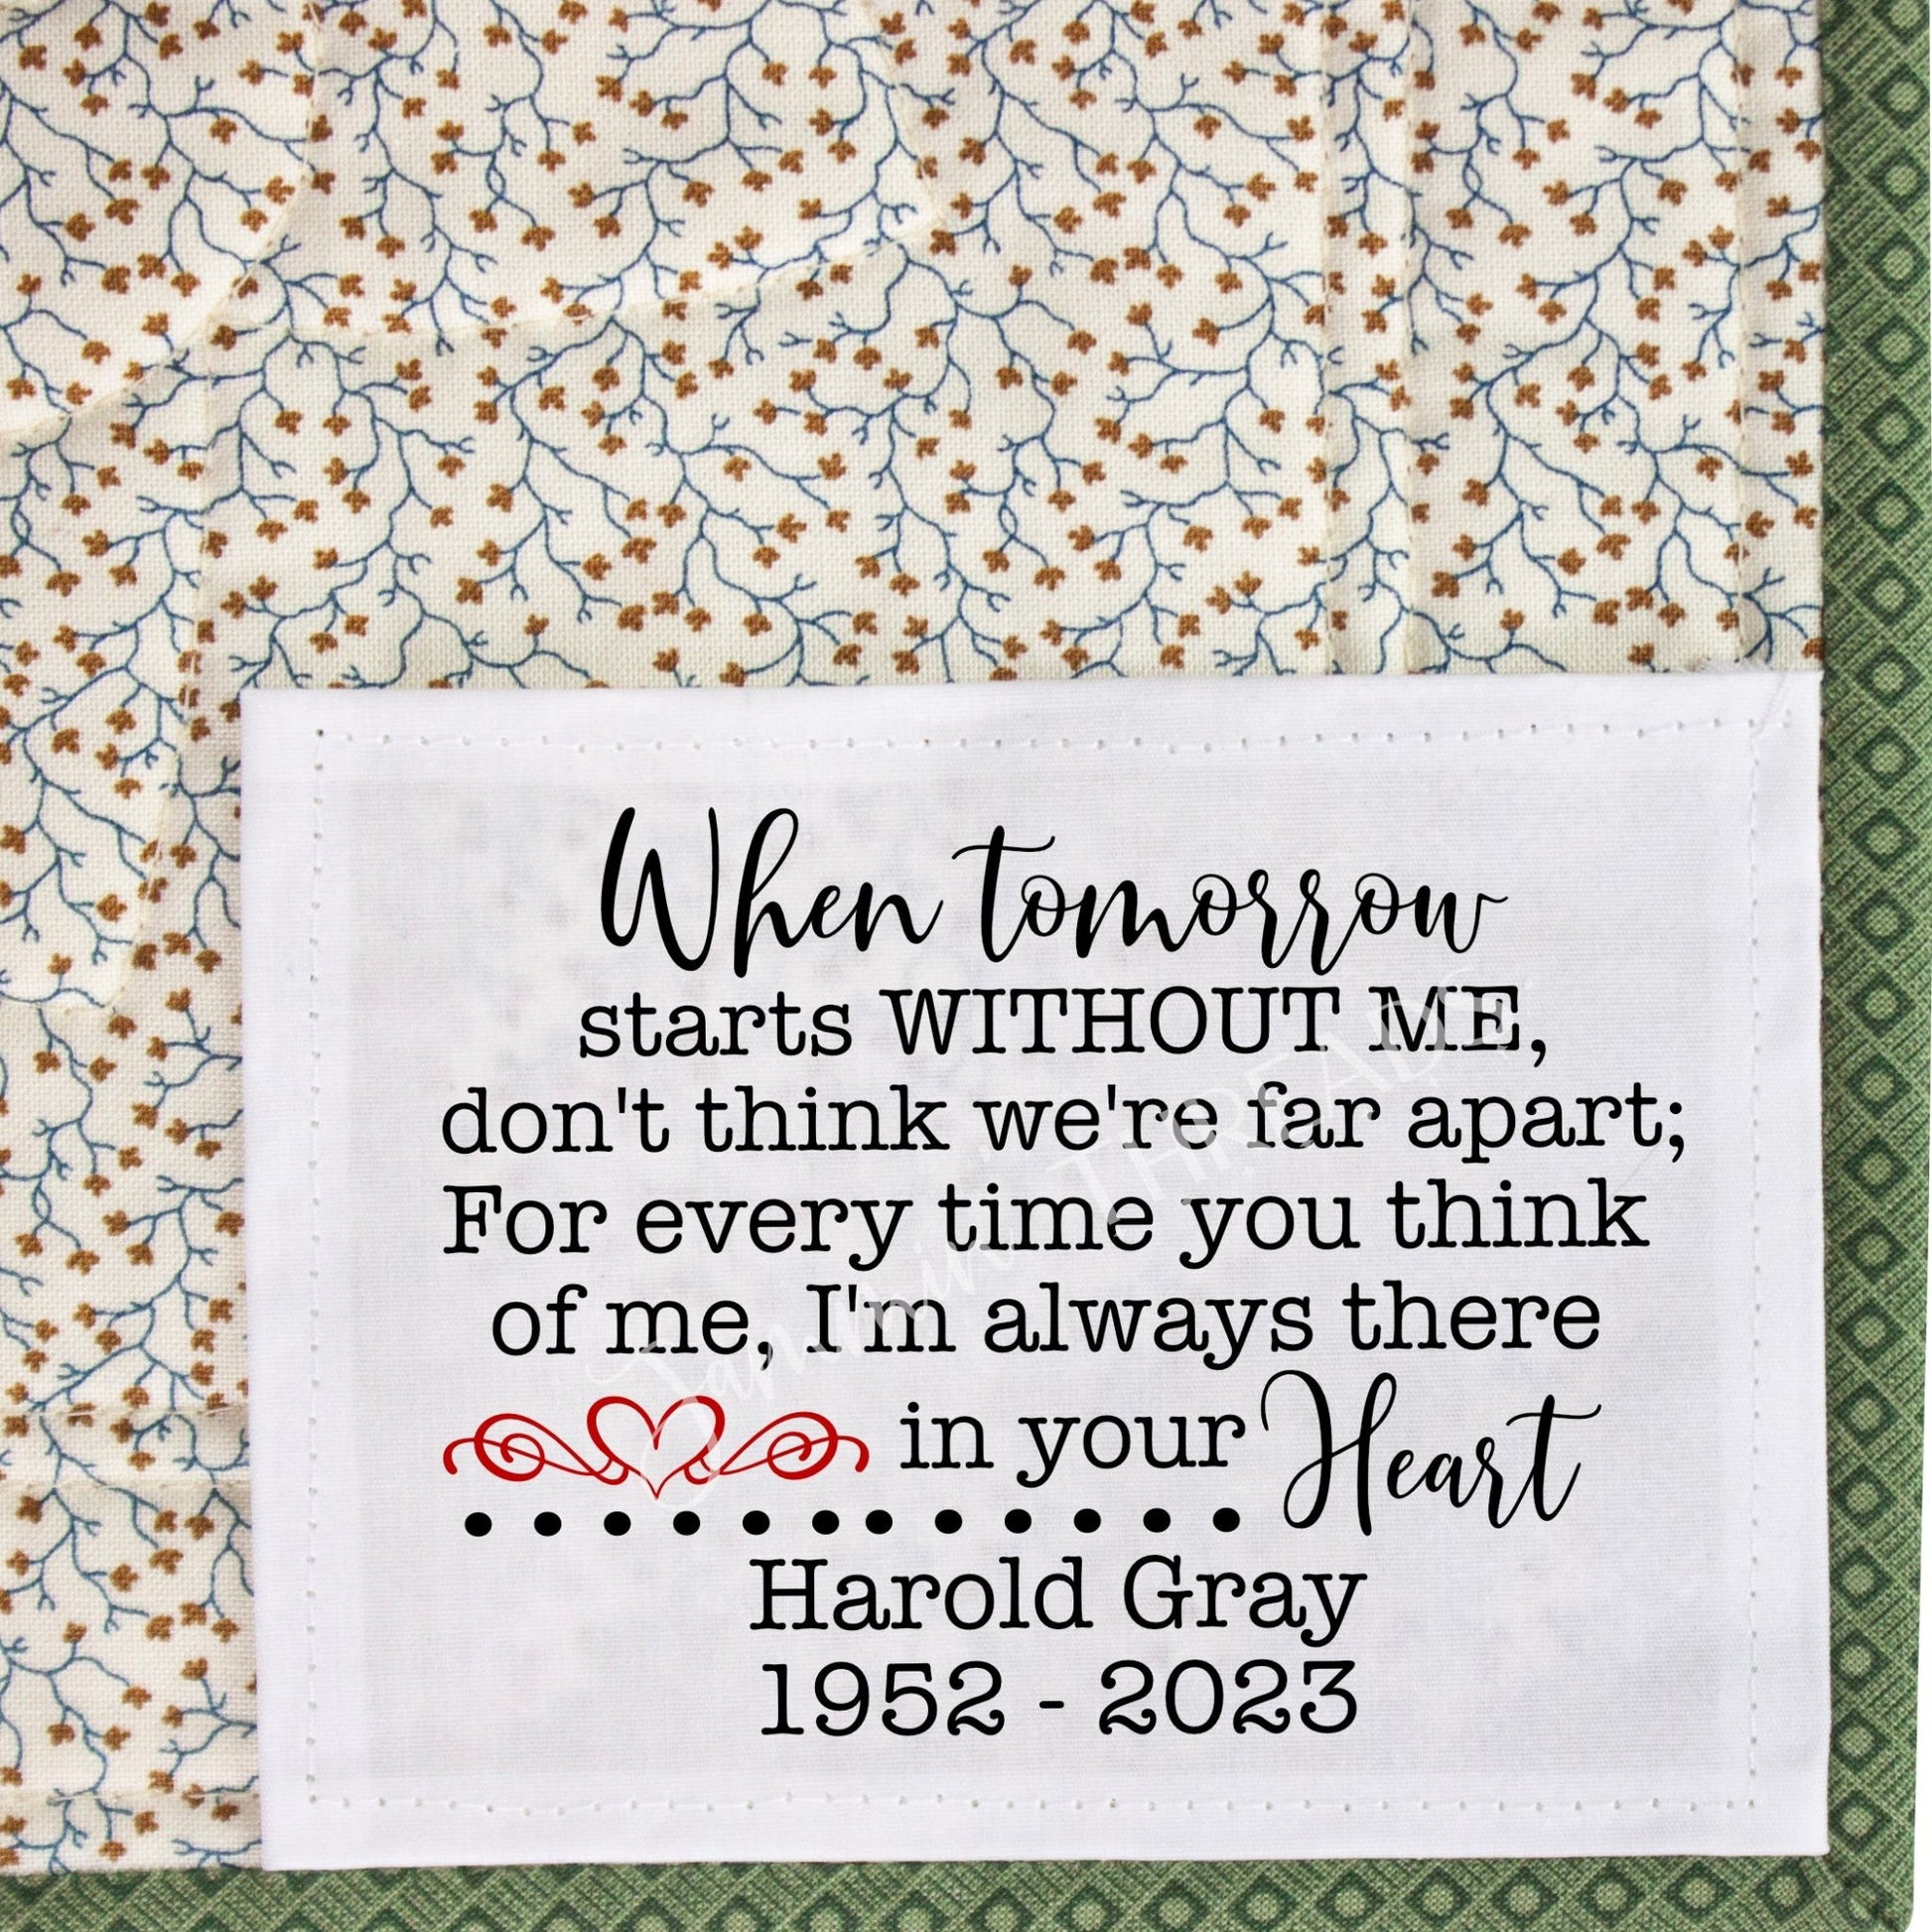 When Tomorrow Starts Without Me. Personalized Memory Quilt Label - Jammin Threads